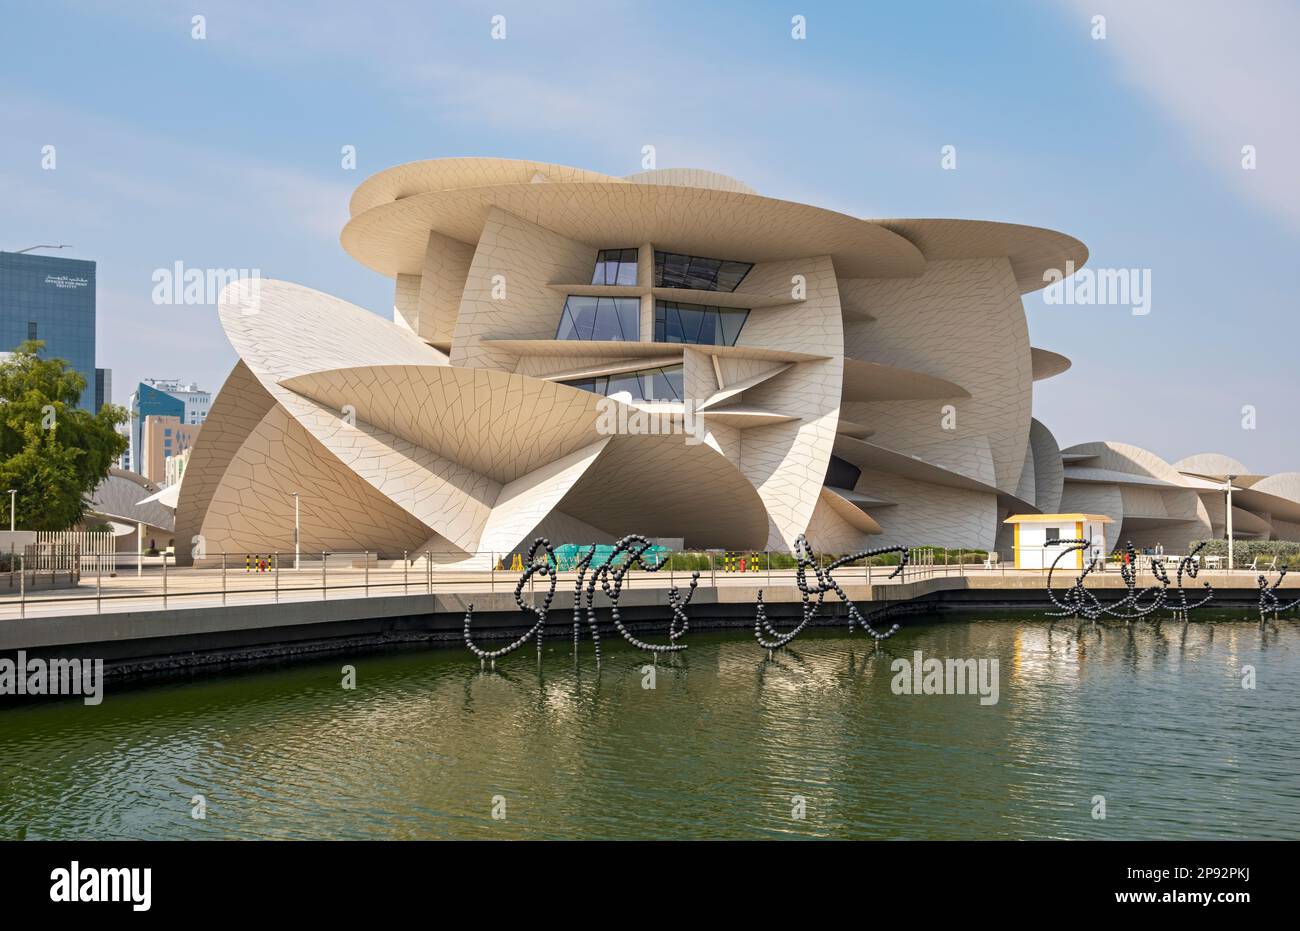 National Museum of Qatar building with Alfa Fountains, Doha Stock Photo